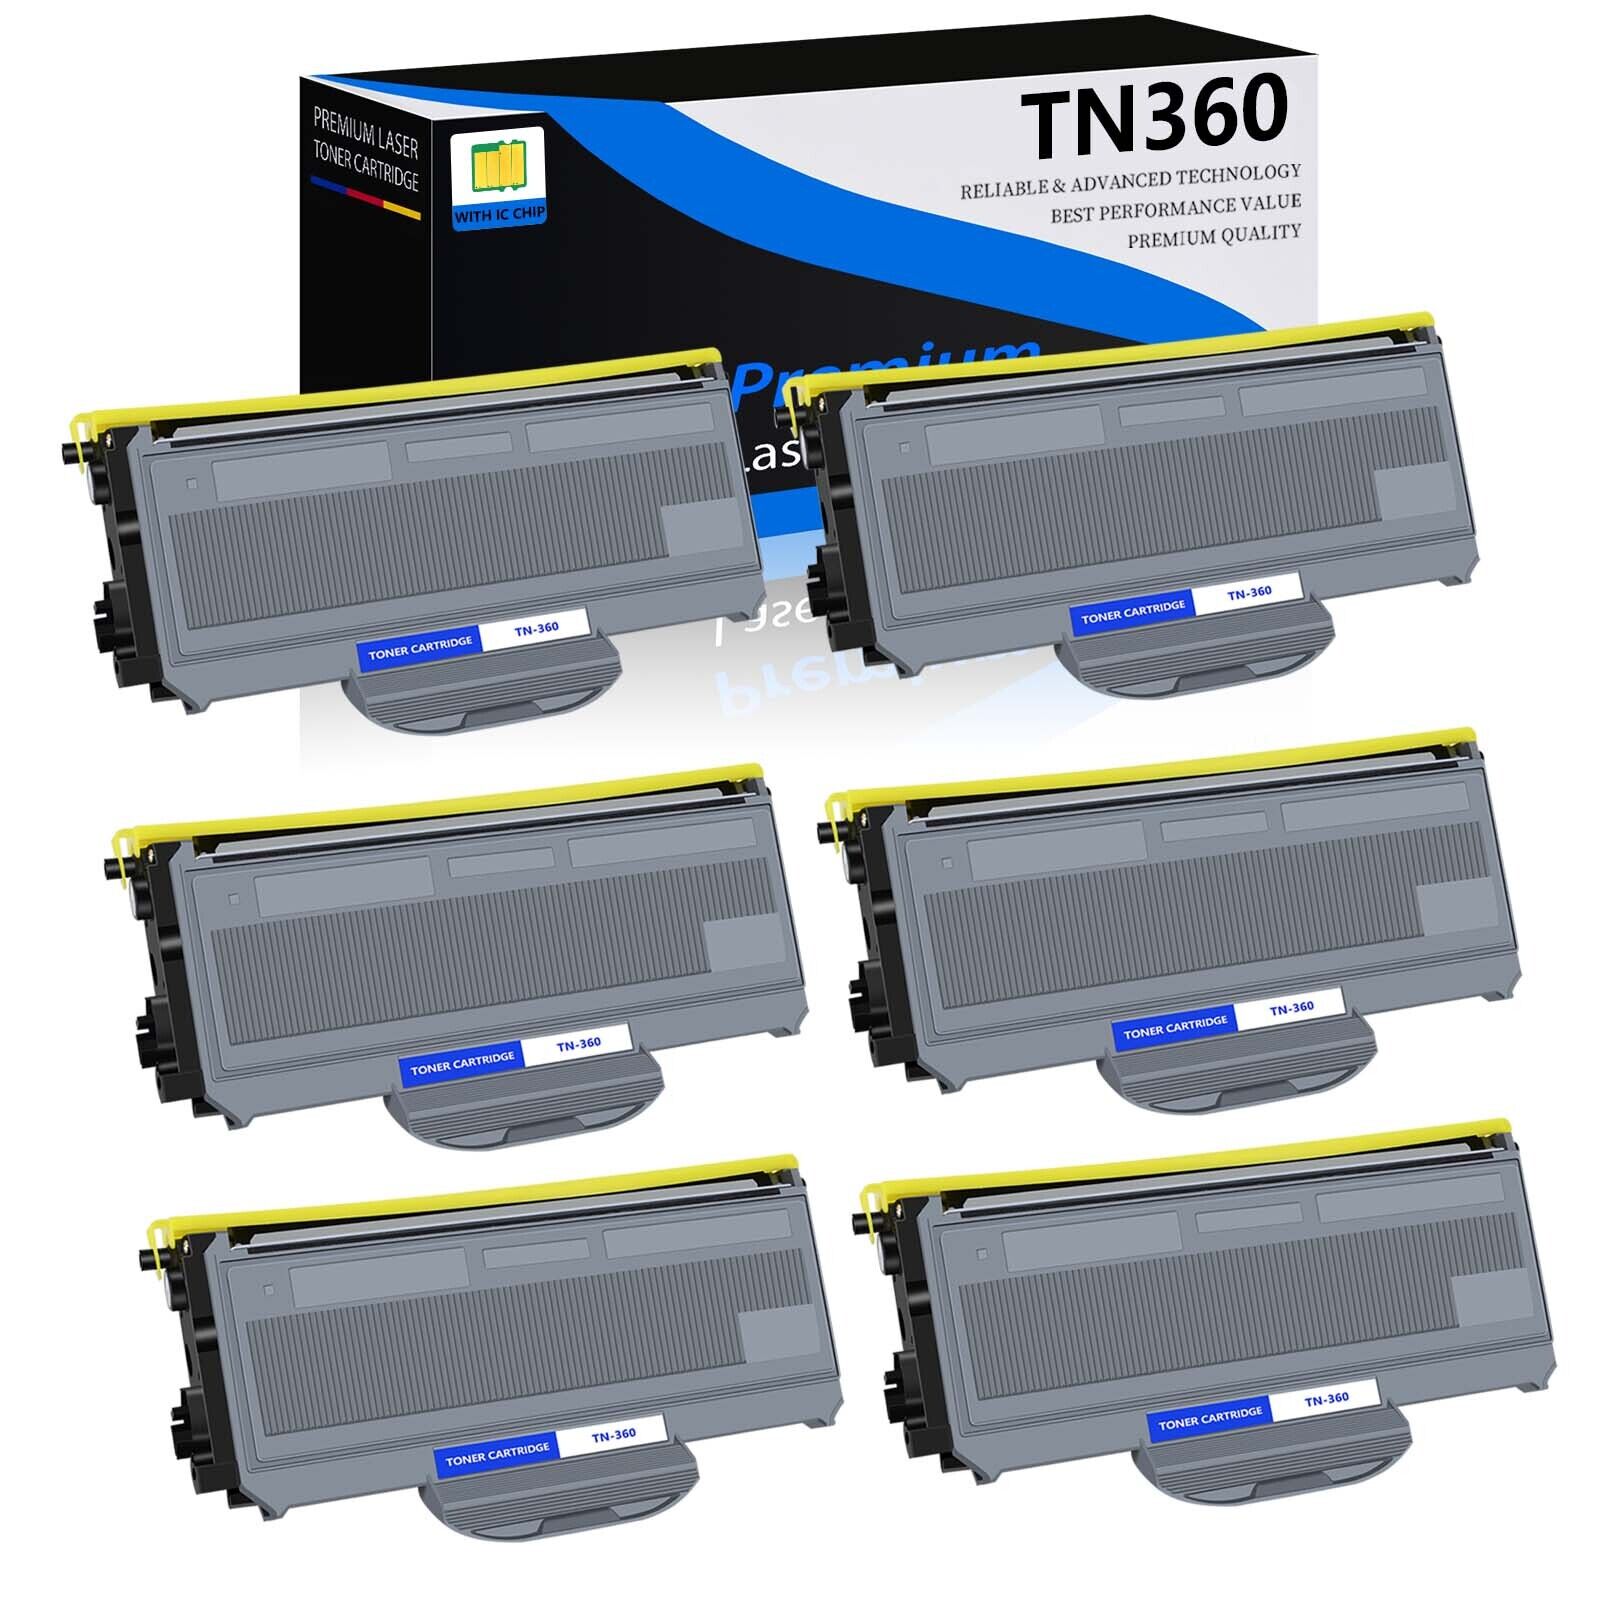 6PK TN360 Toner For TN-360 Brother MFC-7320 MFC-7340 MFC-7345DN MFC-7840W